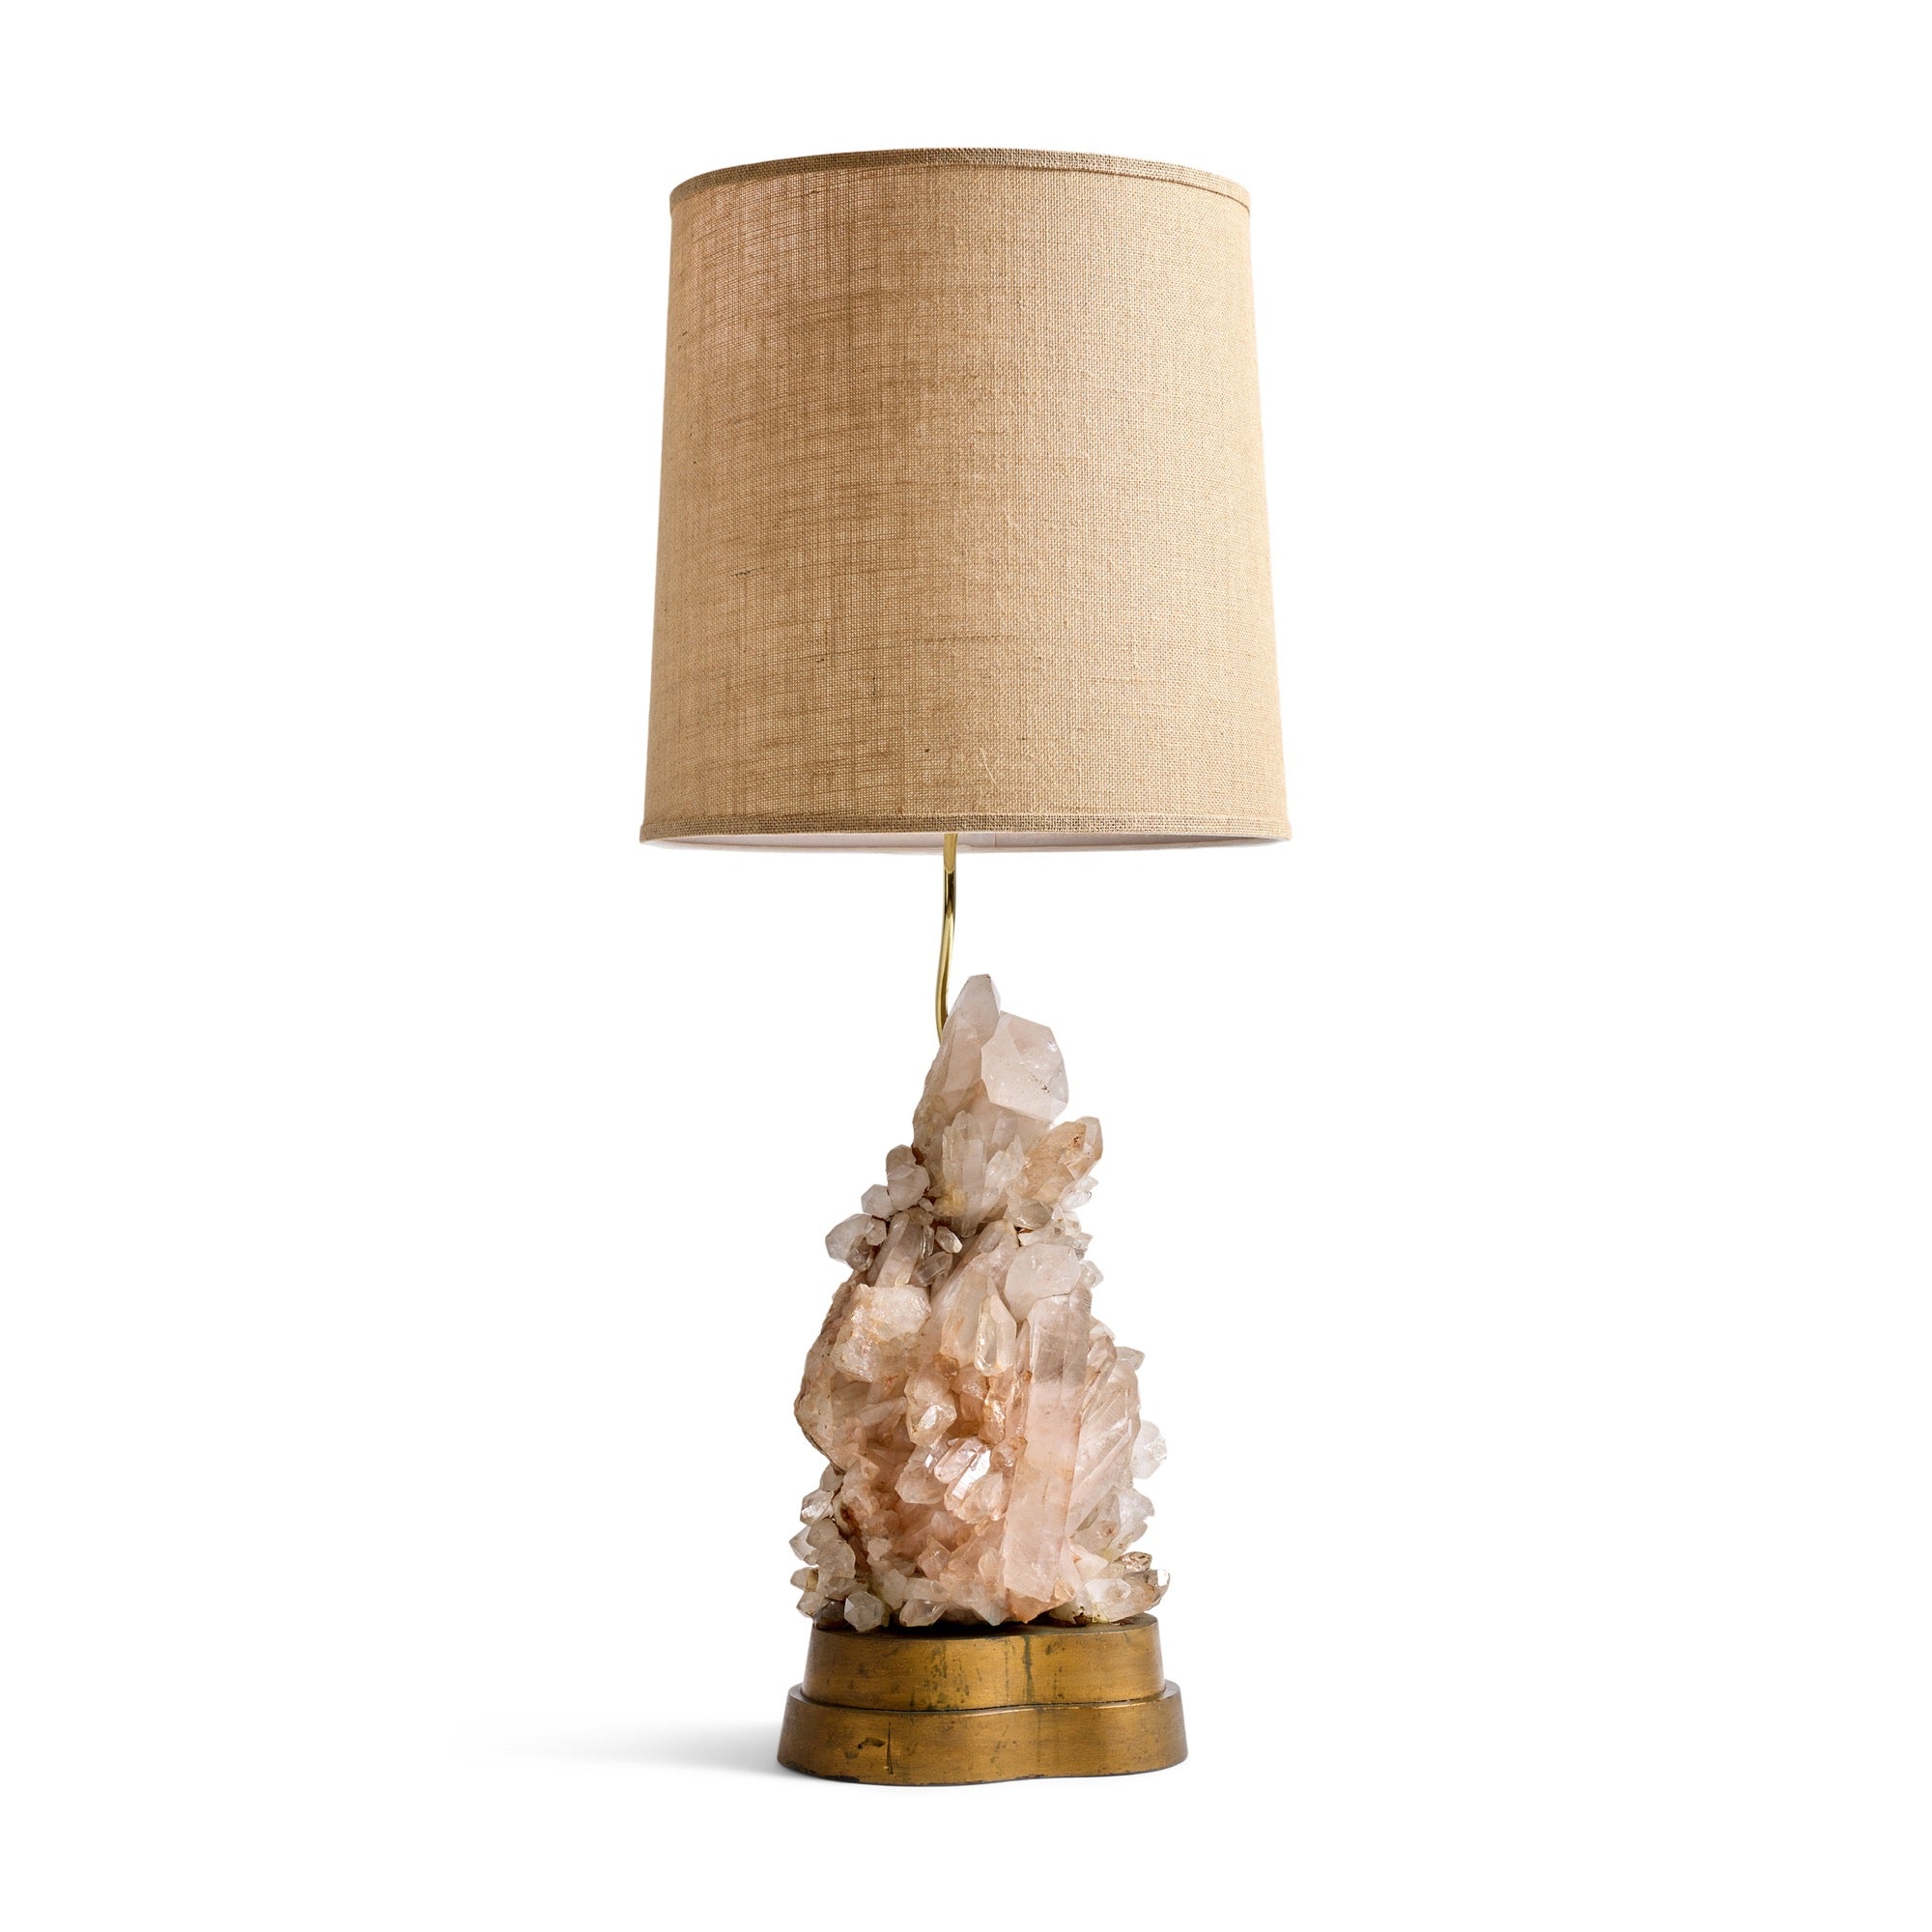 Quartz Crystal Table Lamp by Carole Stupell, 1950s